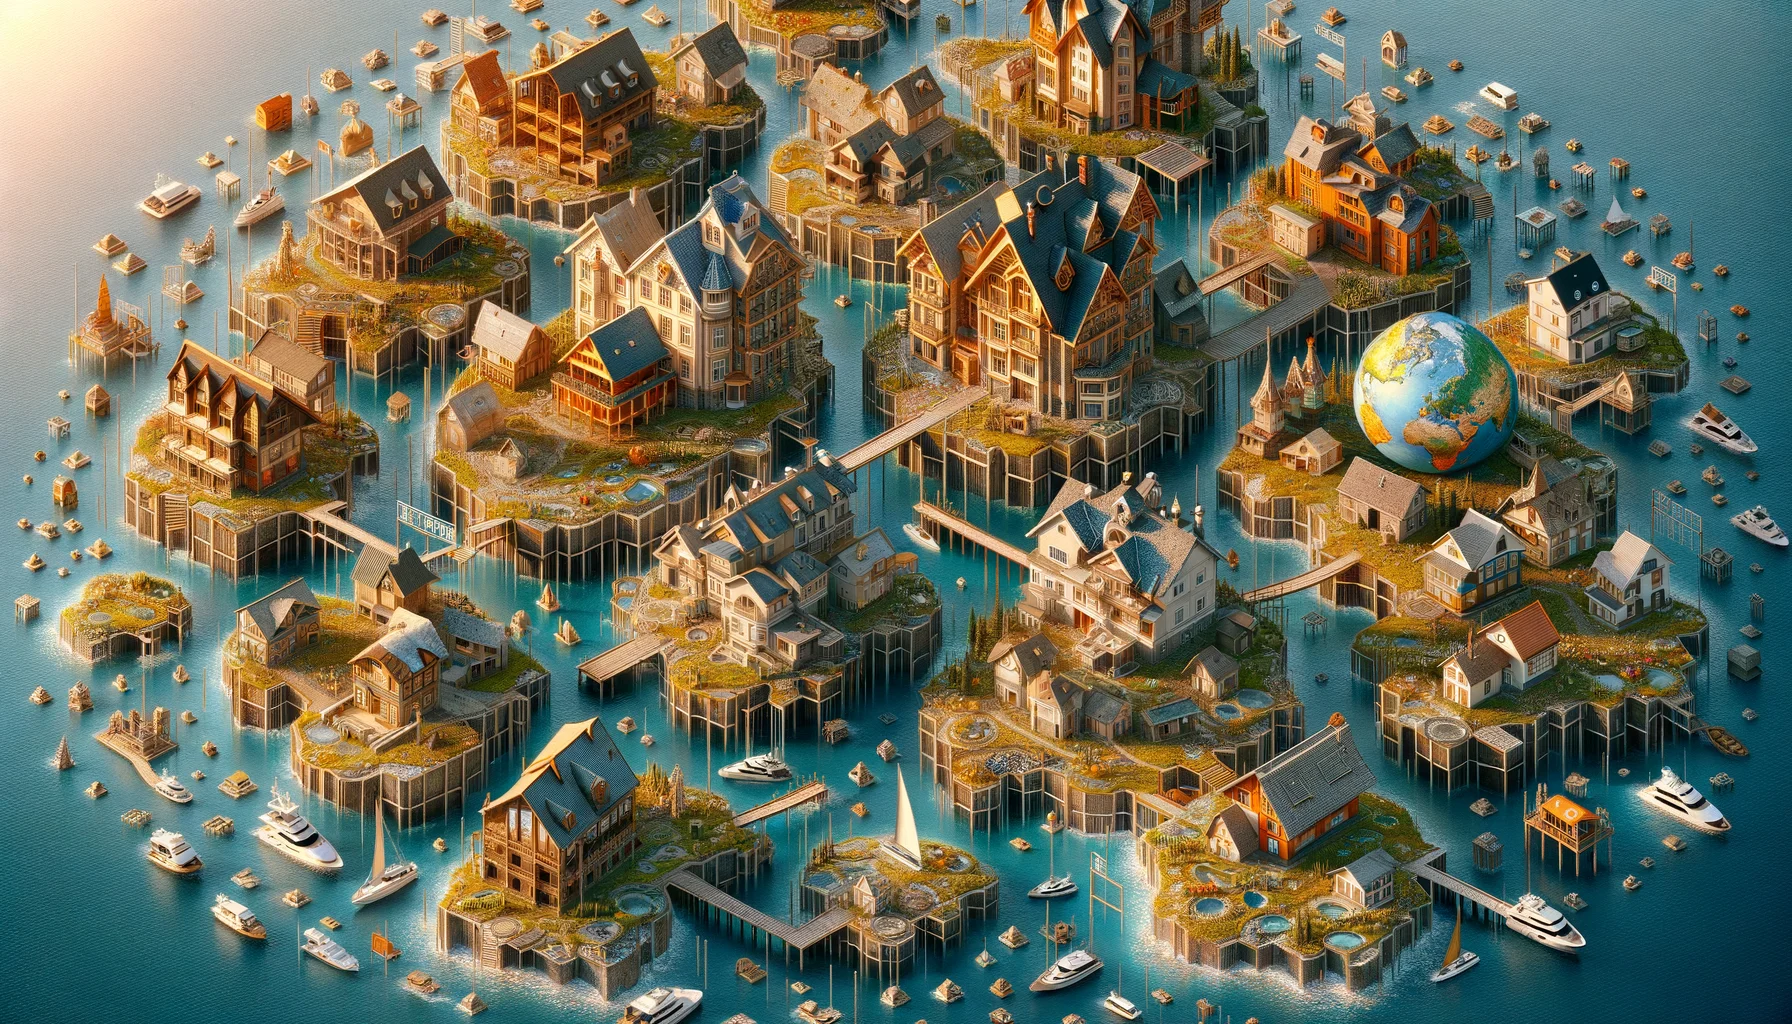 Generate a humorous, hyper-realistic image portraying the concept of home affordability by location in an optimal situation. Picture a large, beautifully designed world map as the central focus. The map is teeming with miniature detailed housing structures, ranging from cottages to skyscrapers, strategically placed in areas representative of the world's varying economic climates. The opulence or simplicity of the houses signals the affordability levels. Have some unexpected humorous elements like a floating house in the ocean or a skyscraper in the desert! The tones are bright and engaging, inviting easy interpretation of this complex issue.